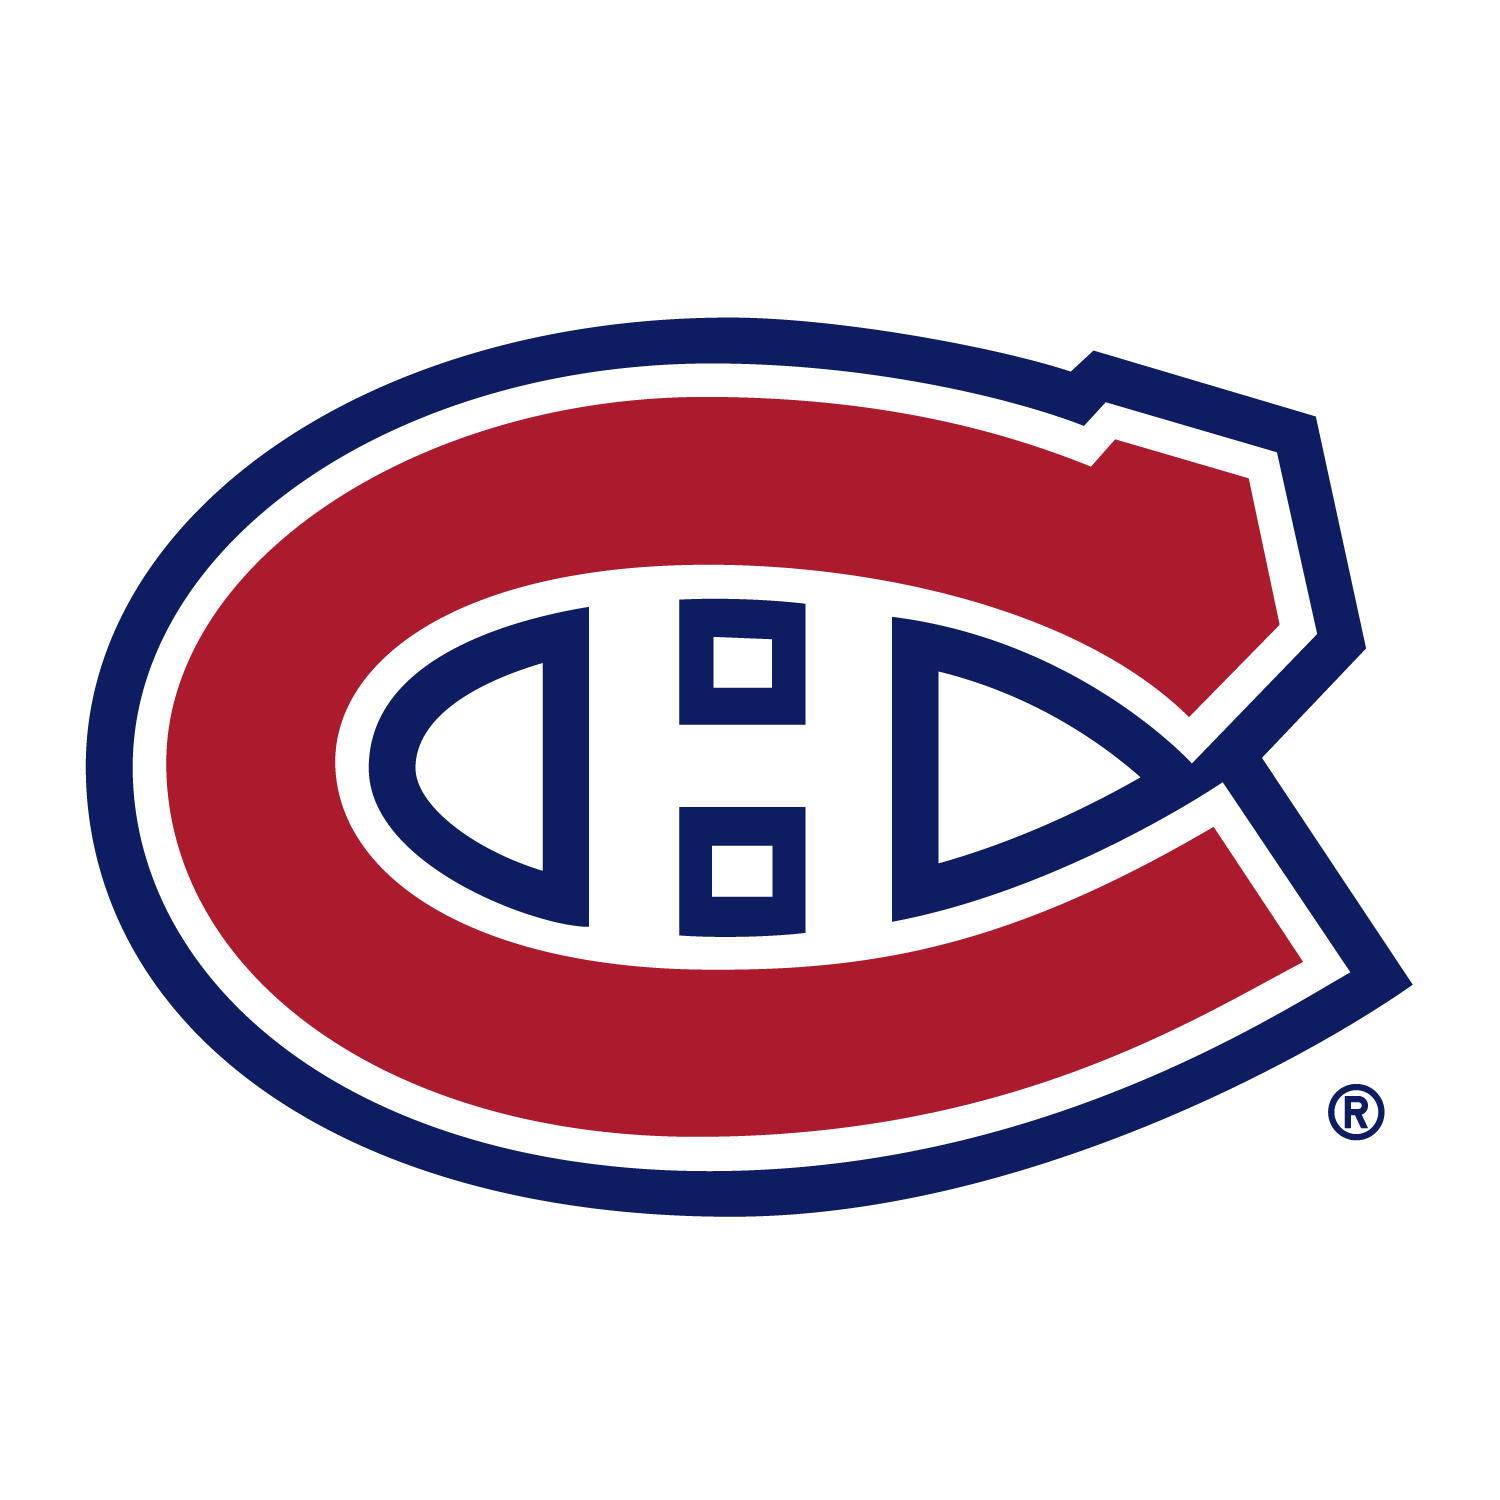 Shop Montreal Canadiens products